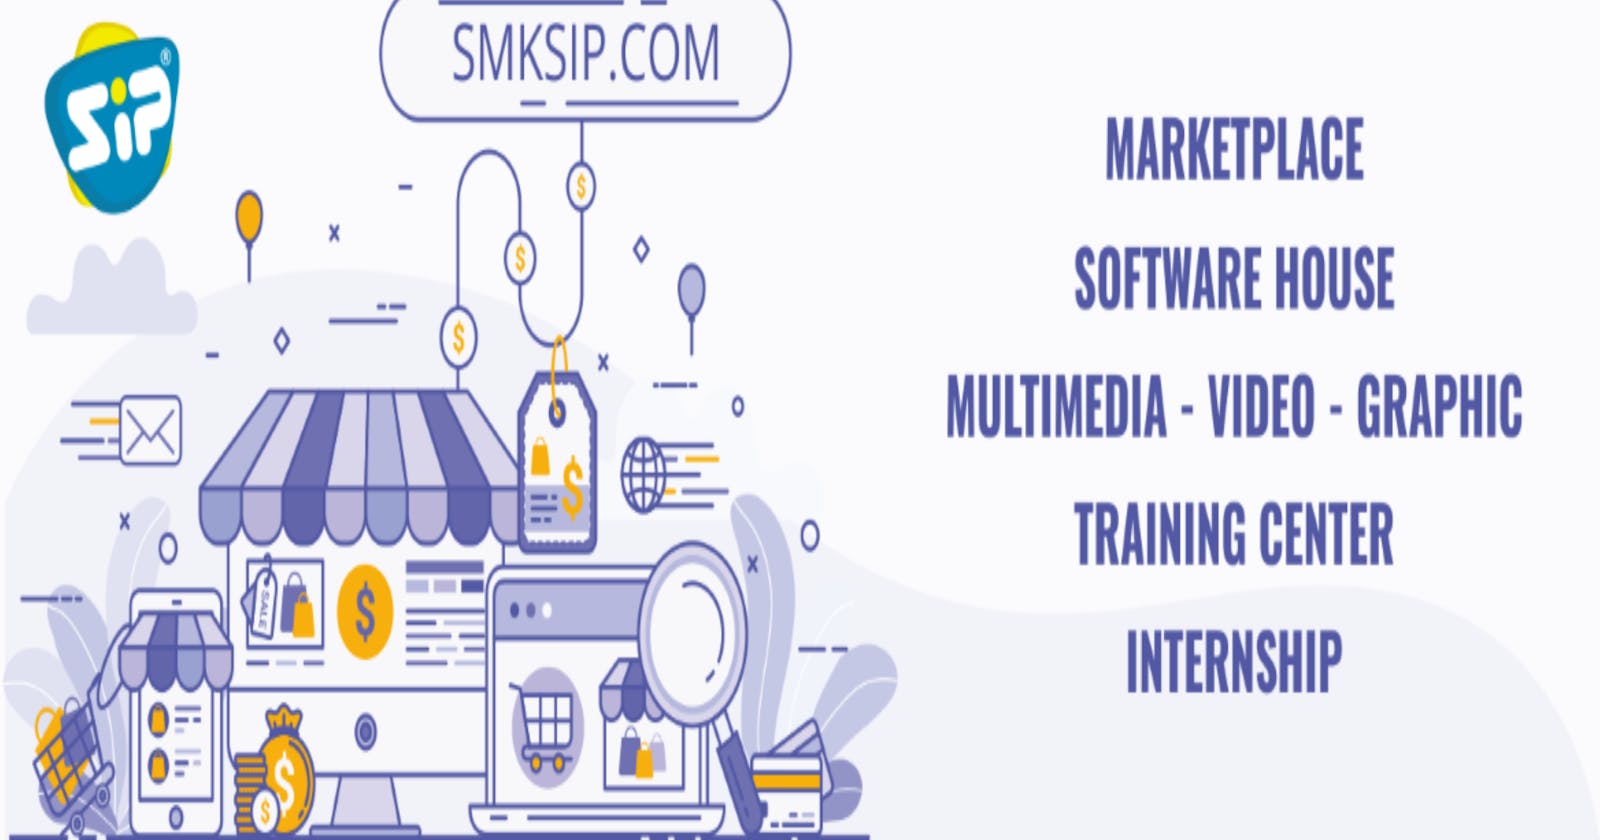 Innovation in Education: SMKSIP.com Opens New Opportunities for Vocational School Students